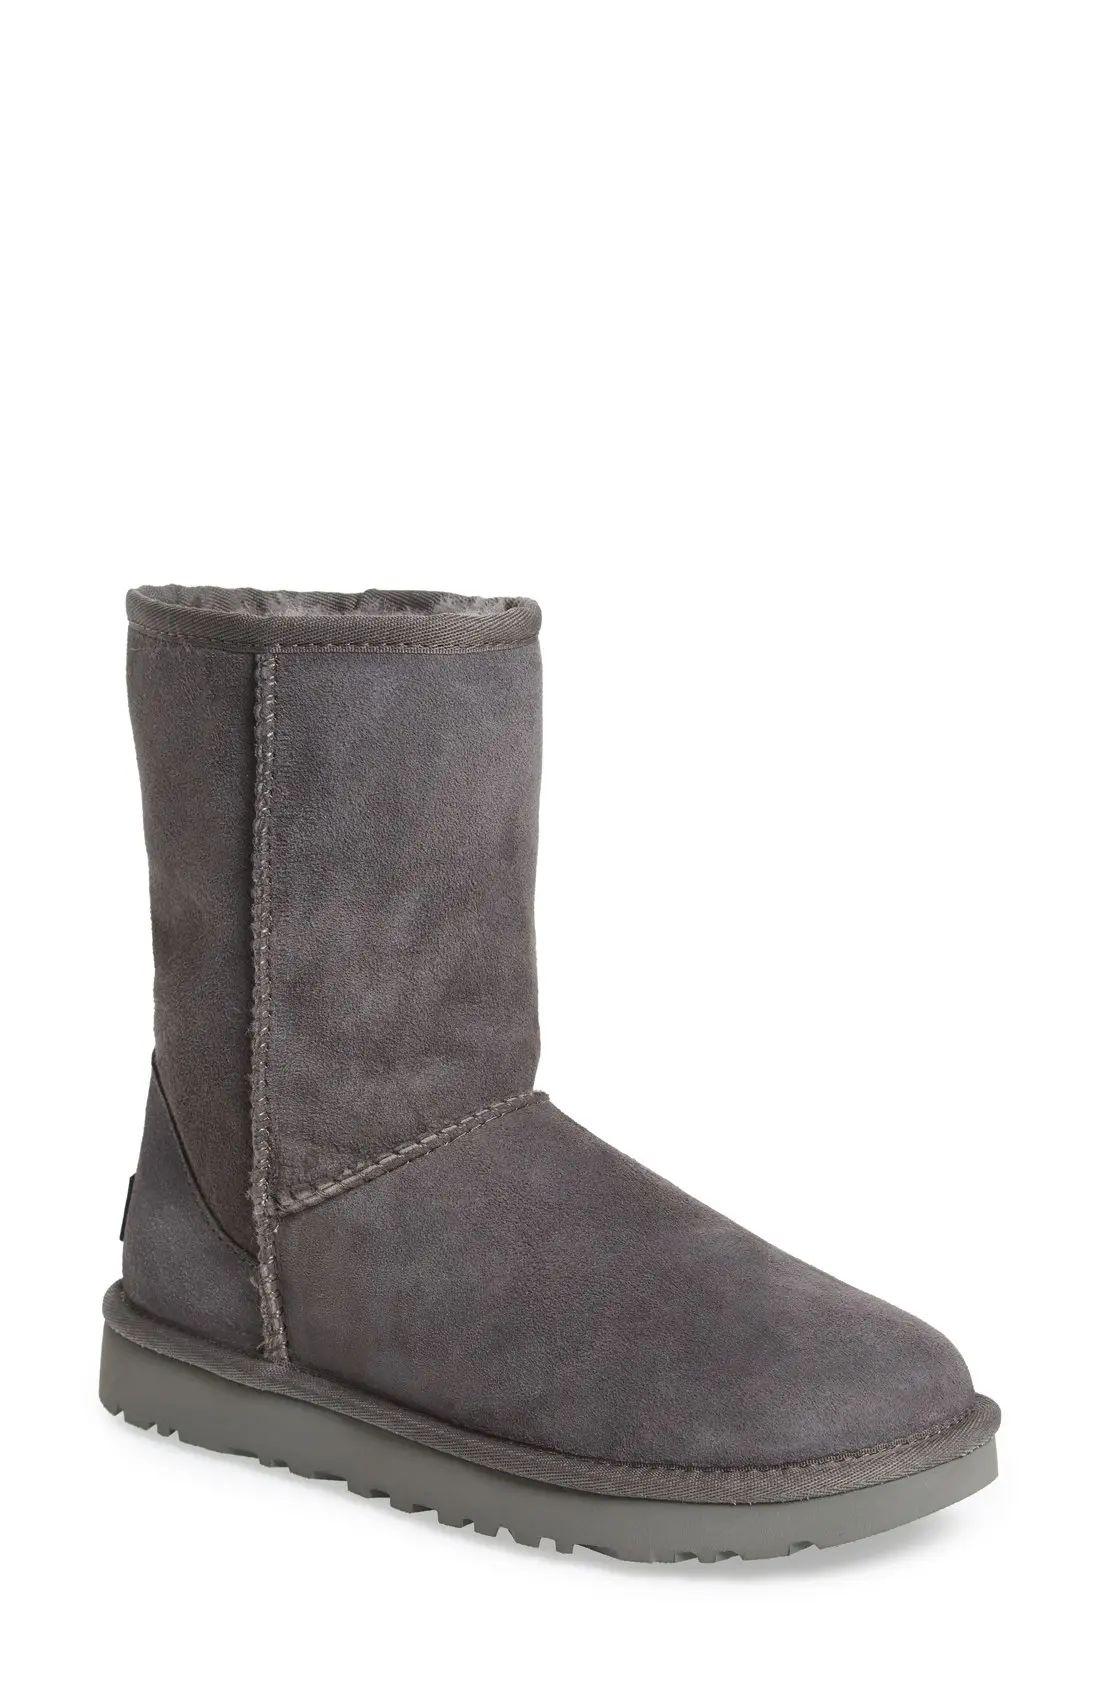 'Classic II' Genuine Shearling Lined Short Boot | Nordstrom